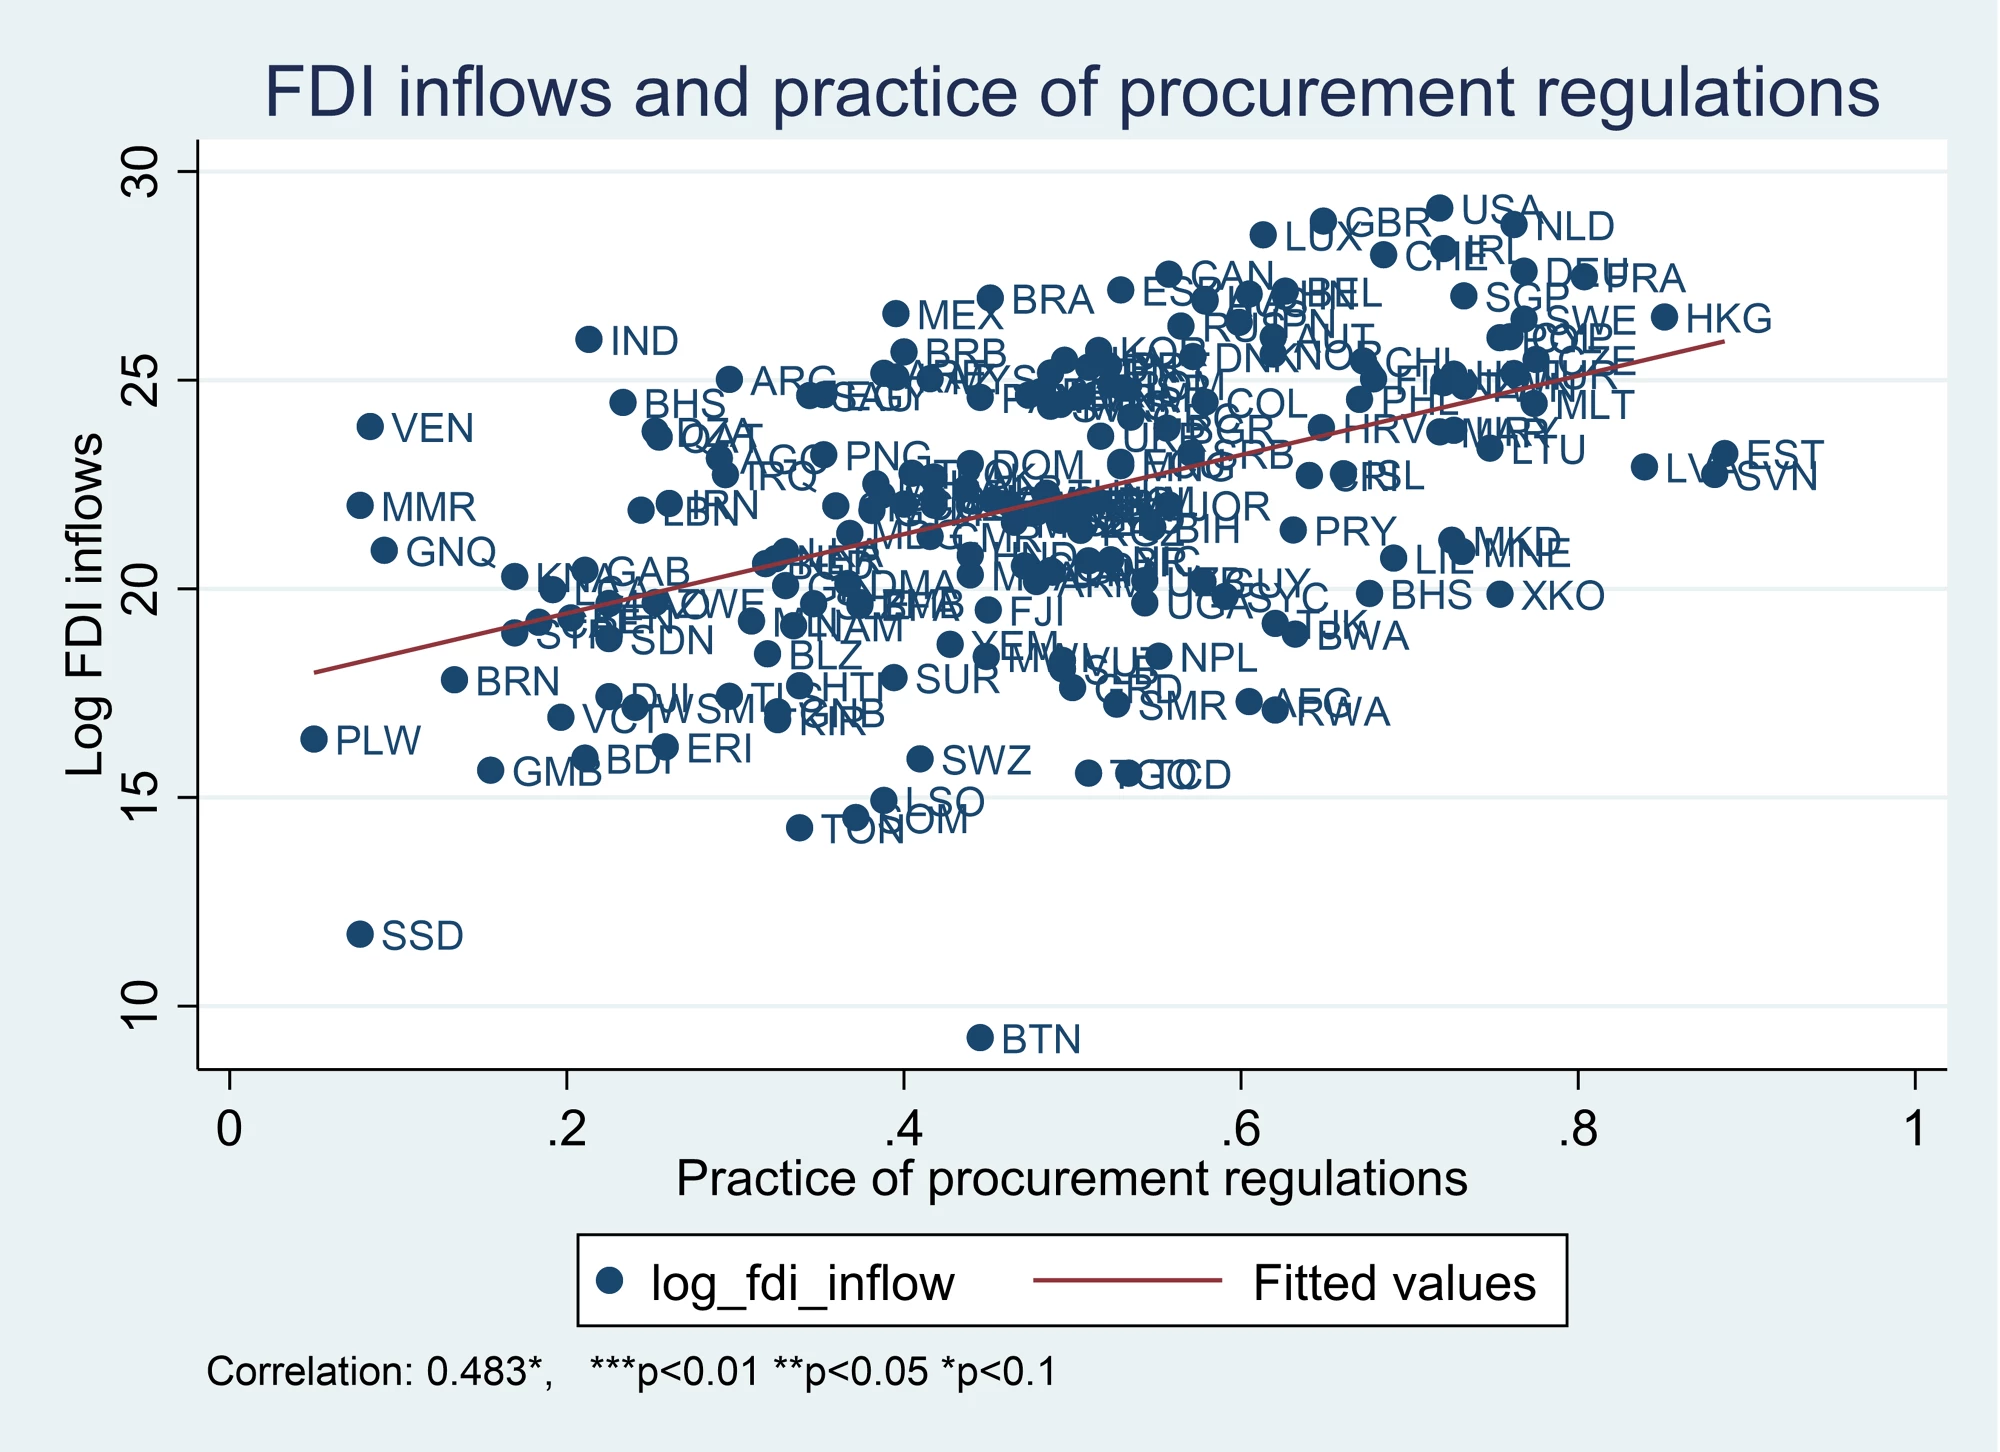 Figure 2: FDI flows Are Higher in Countries with Better Practice of Procurement